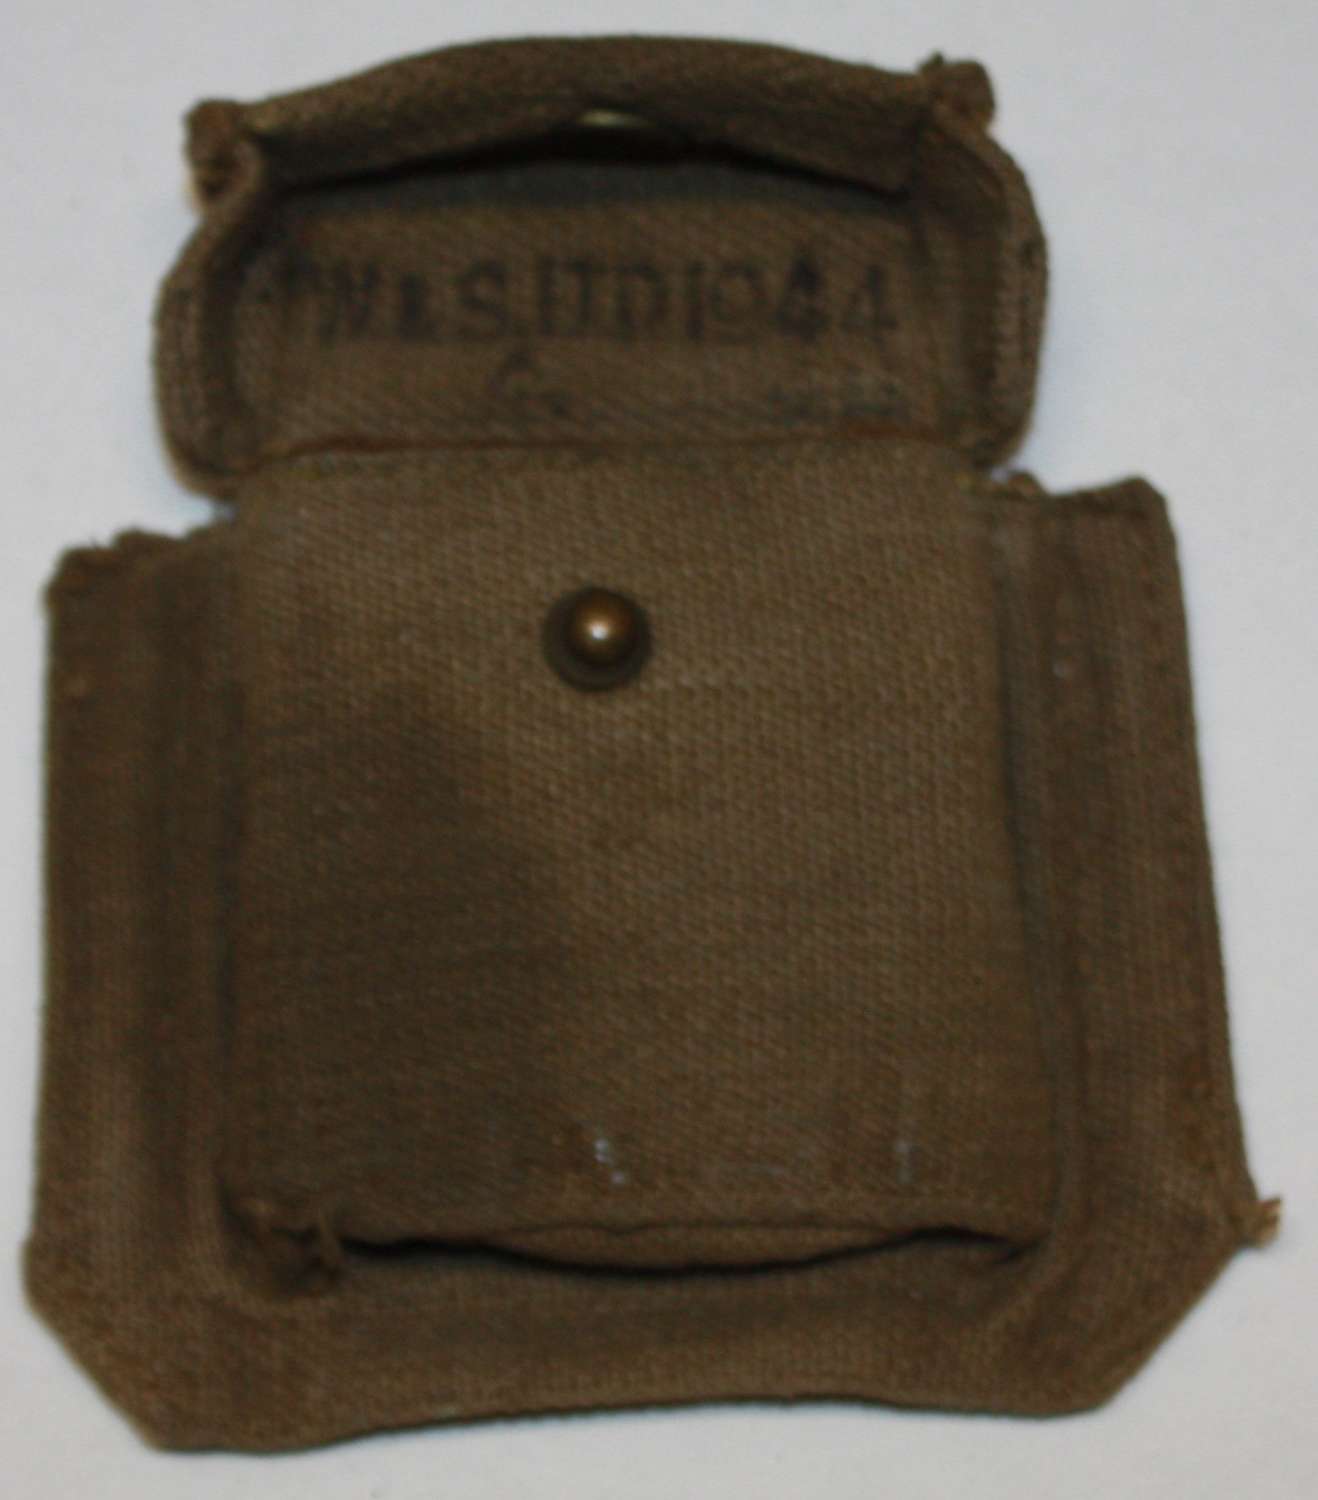 A 1944 DATED 37 PATTERN COMPASS POUCH MADE BY MWS